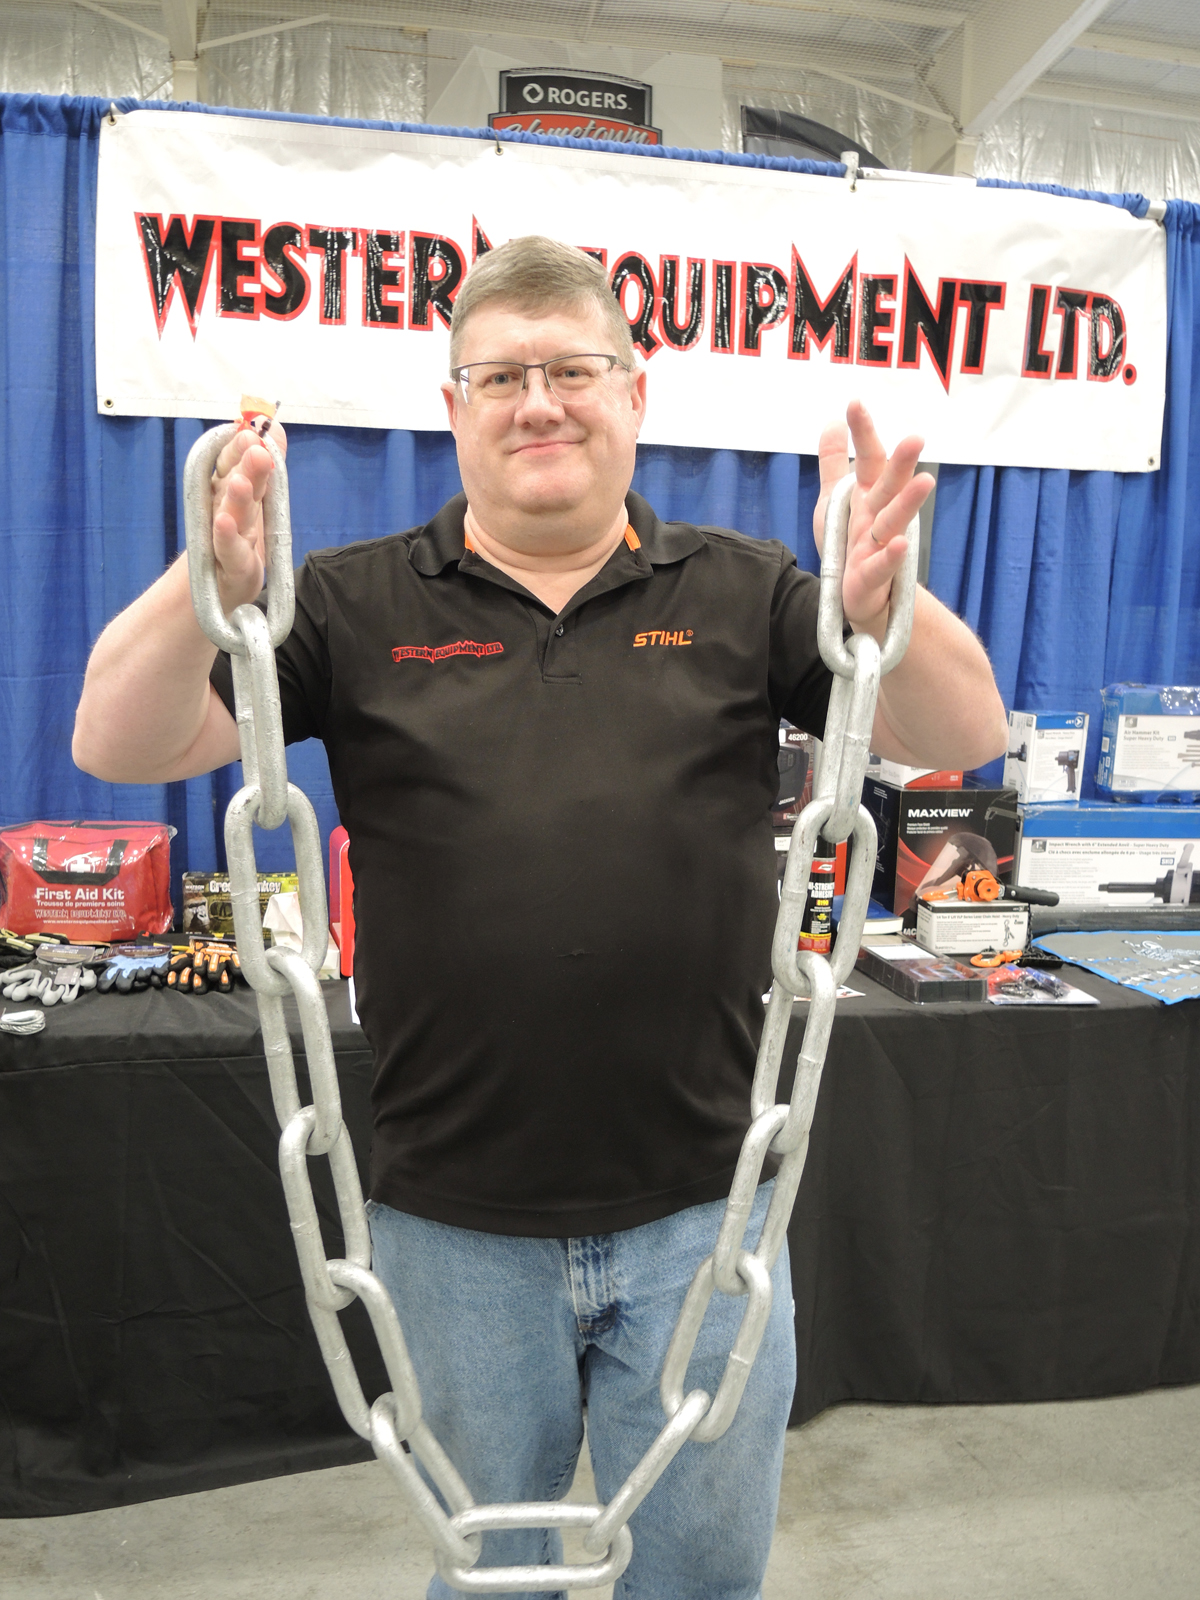 John McLaren of Western Equipment Ltd., displays a longlink mooring chain at the Ship to Shore Industrial Trade Show, at Wurtele Arena on Aug. 1. Credit: Peter Mallett/Lookout Newspaper